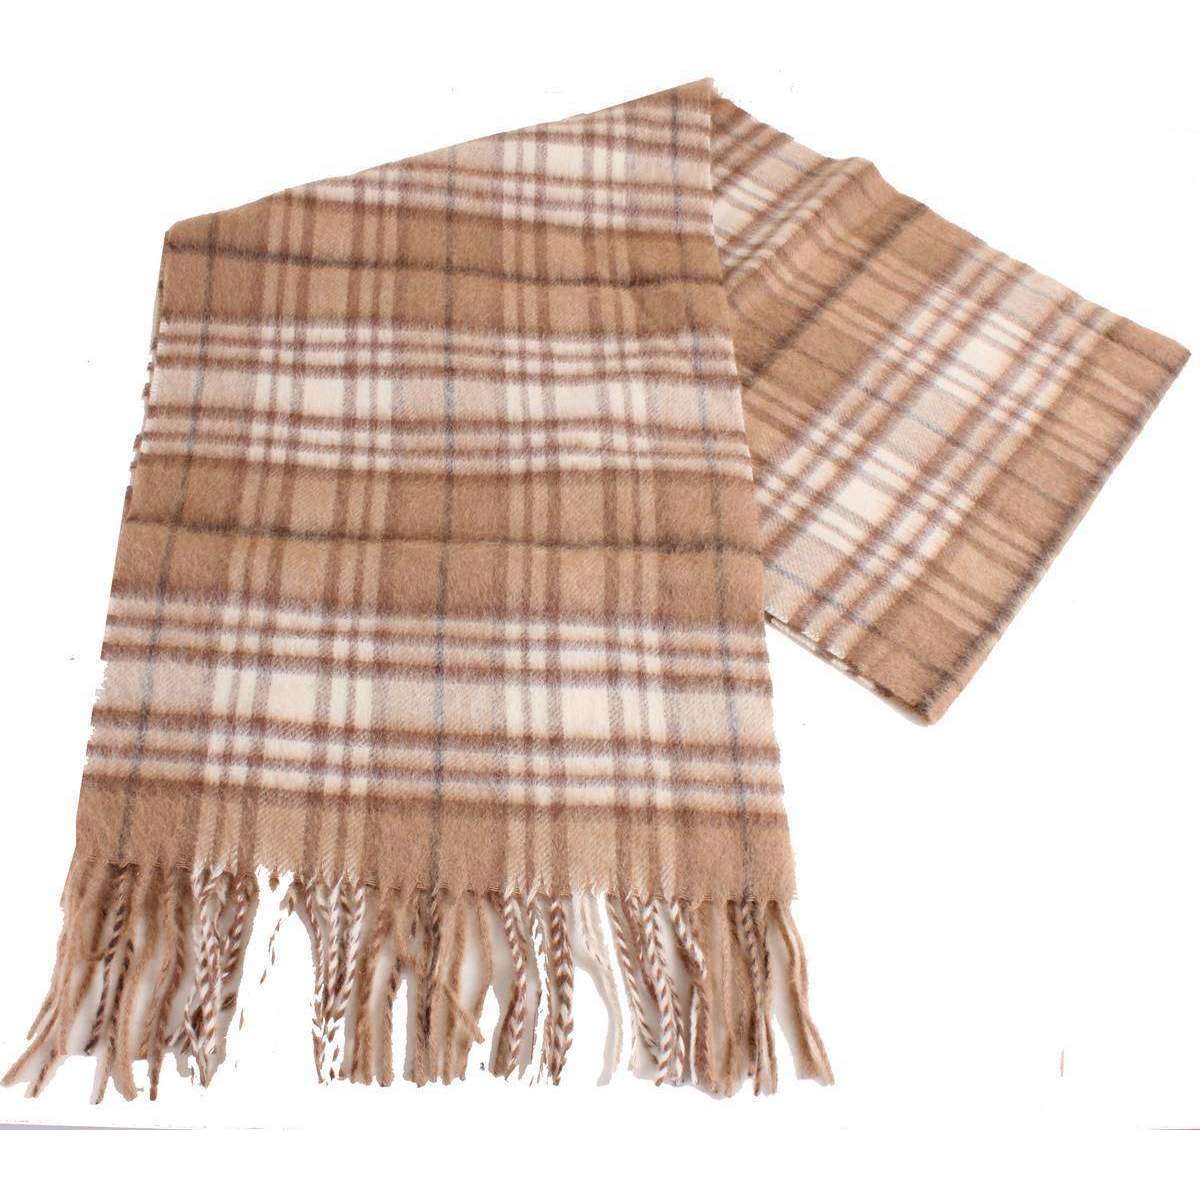 Bassin and Brown Read Checked Camel Hair Scarf - Beige/Cream